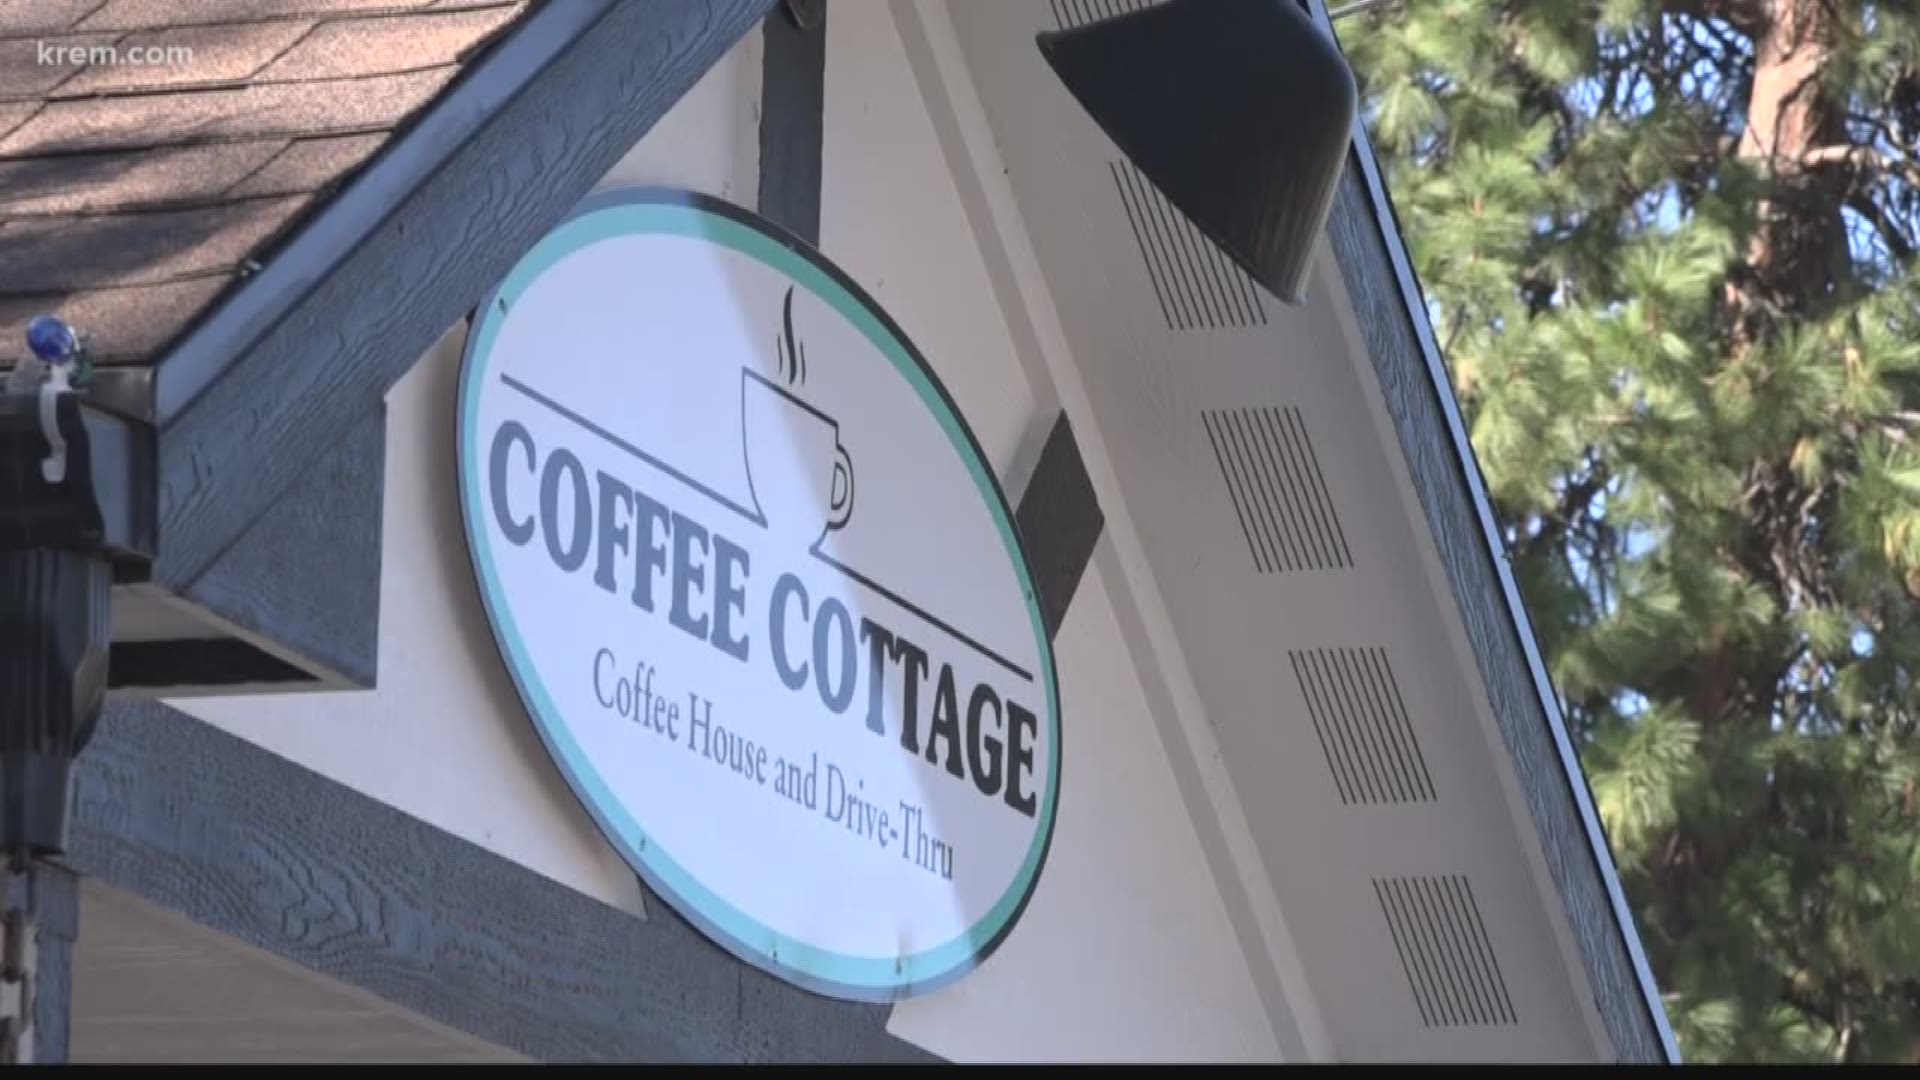 Workers at a coffee shop in Post Falls are finding themselves in the middle of a bullying battle. Two baristas stopped serving coffee to break up a fight outside of their building.